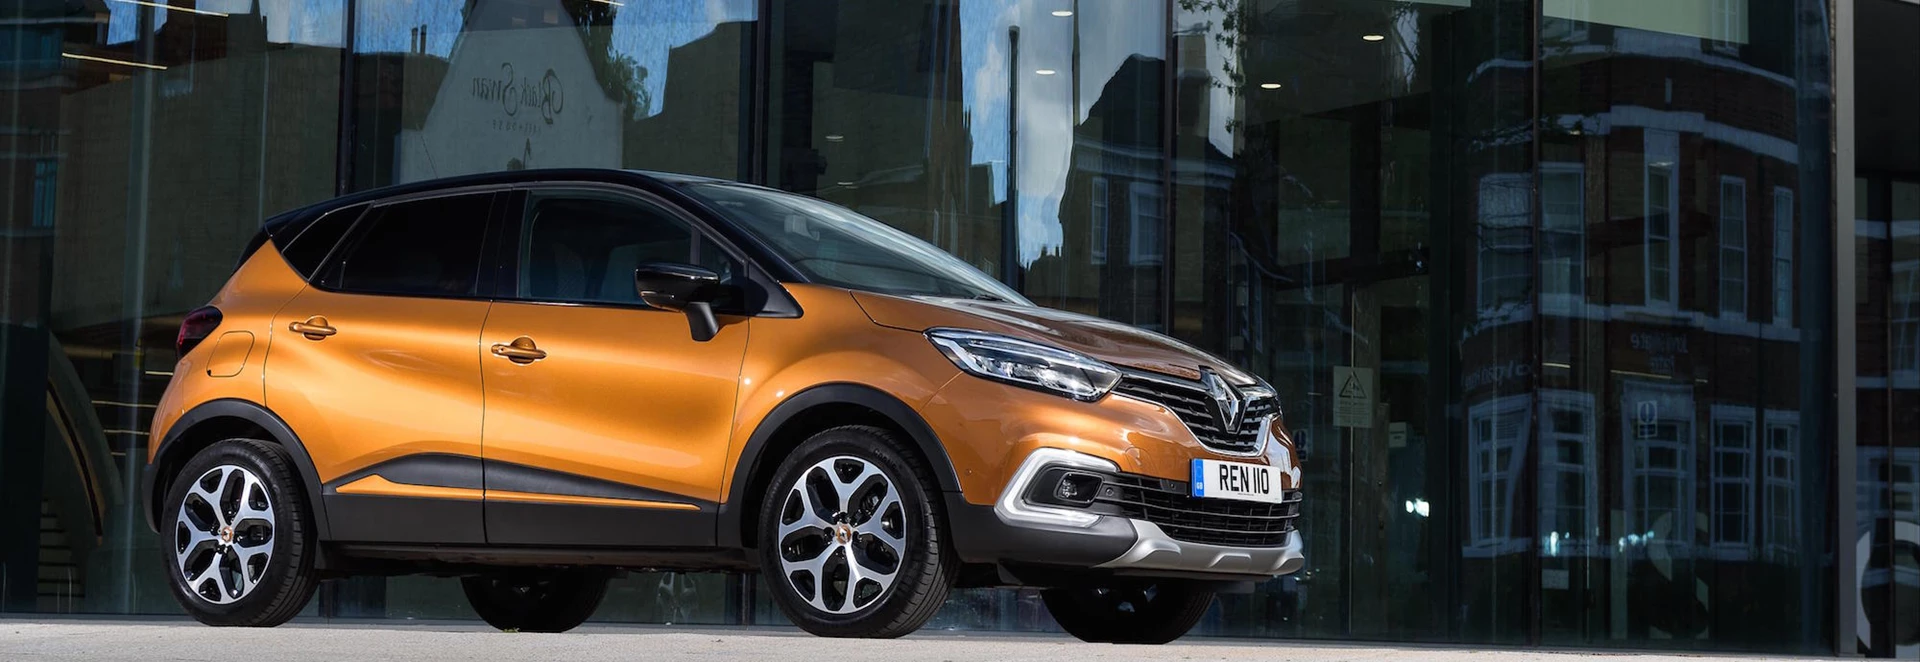 Renault Captur refreshed to maintain strong sales